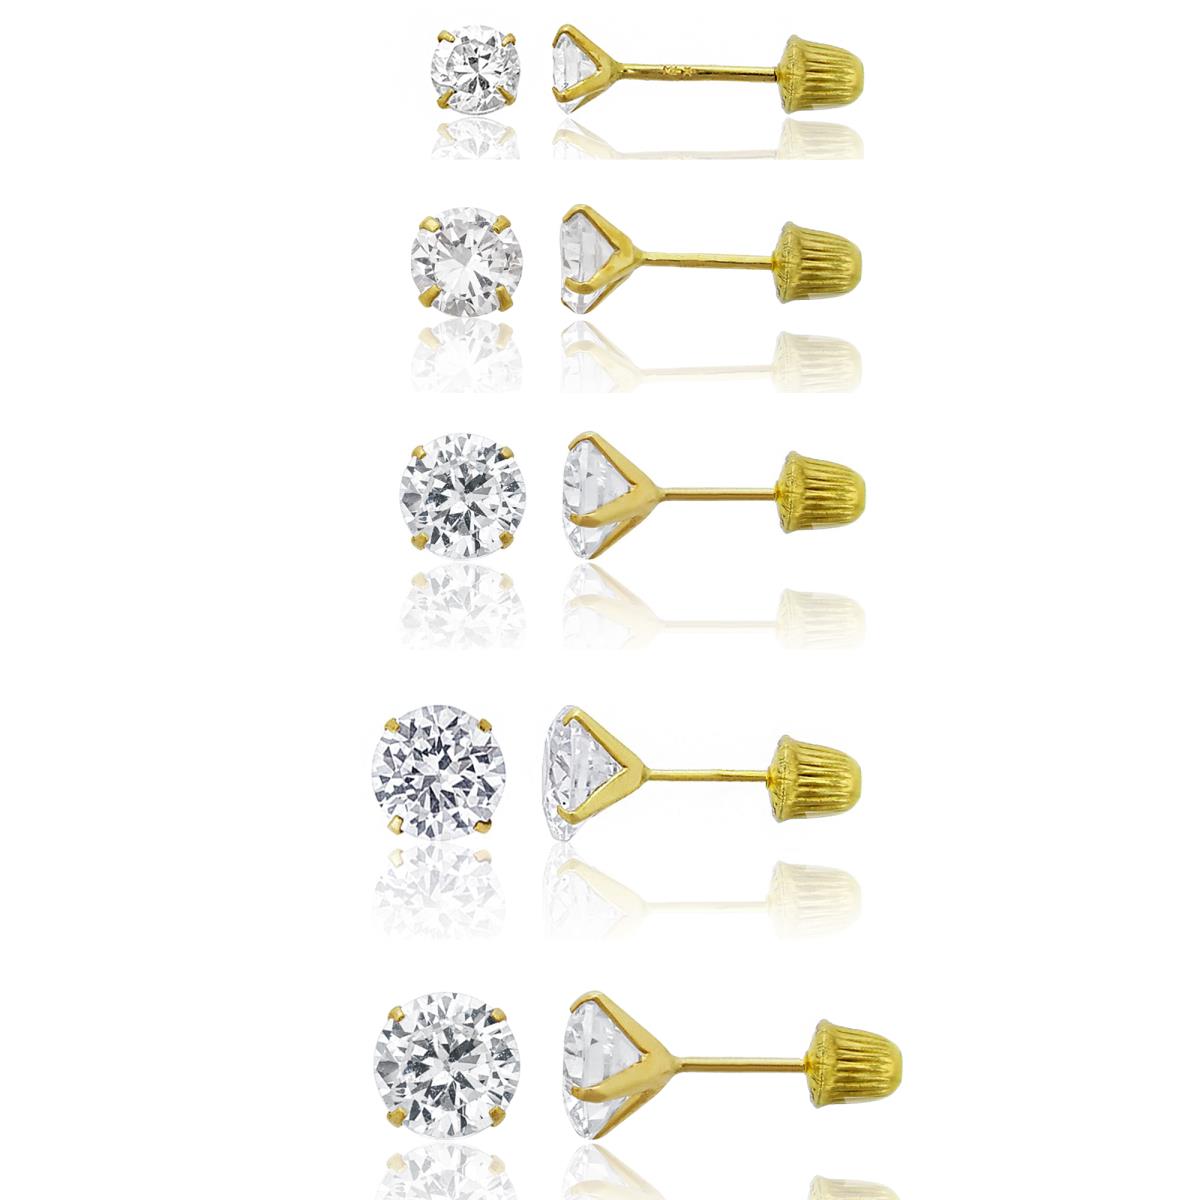 14K Yellow Gold 3mm/4mm/5mm/6mm/7mm Round Solitaire Ball Screw Back Earring Set